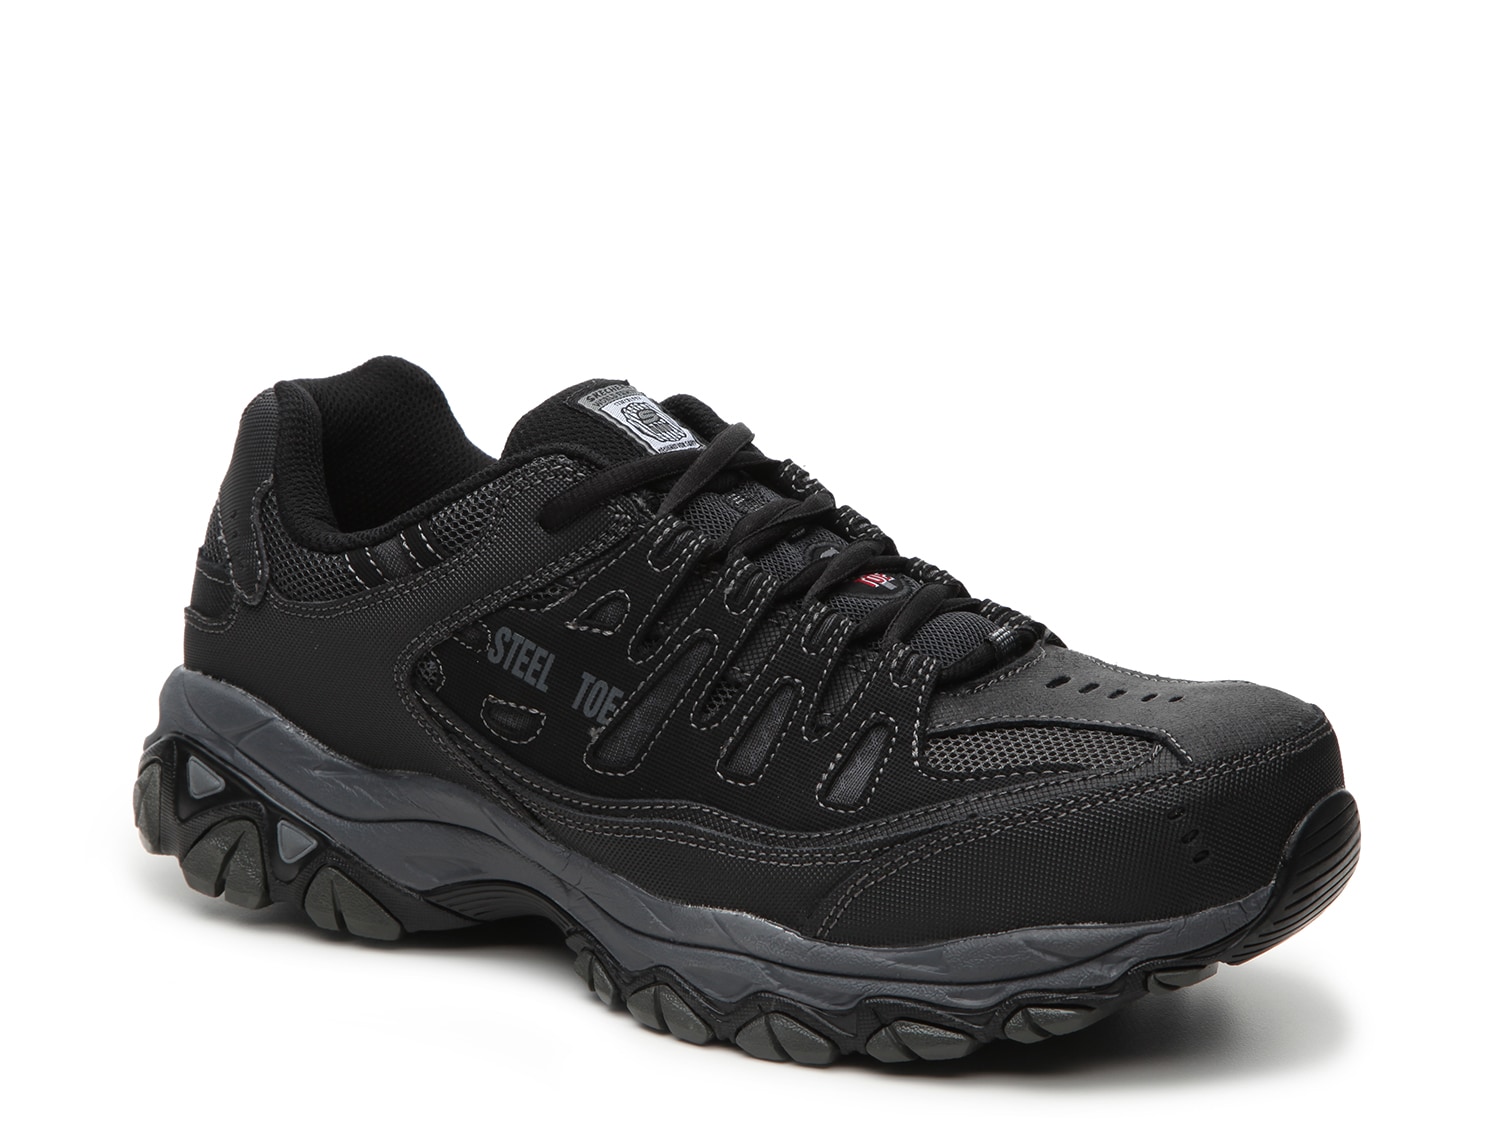 Skechers Relaxed Fit Cankton Steel Toe 